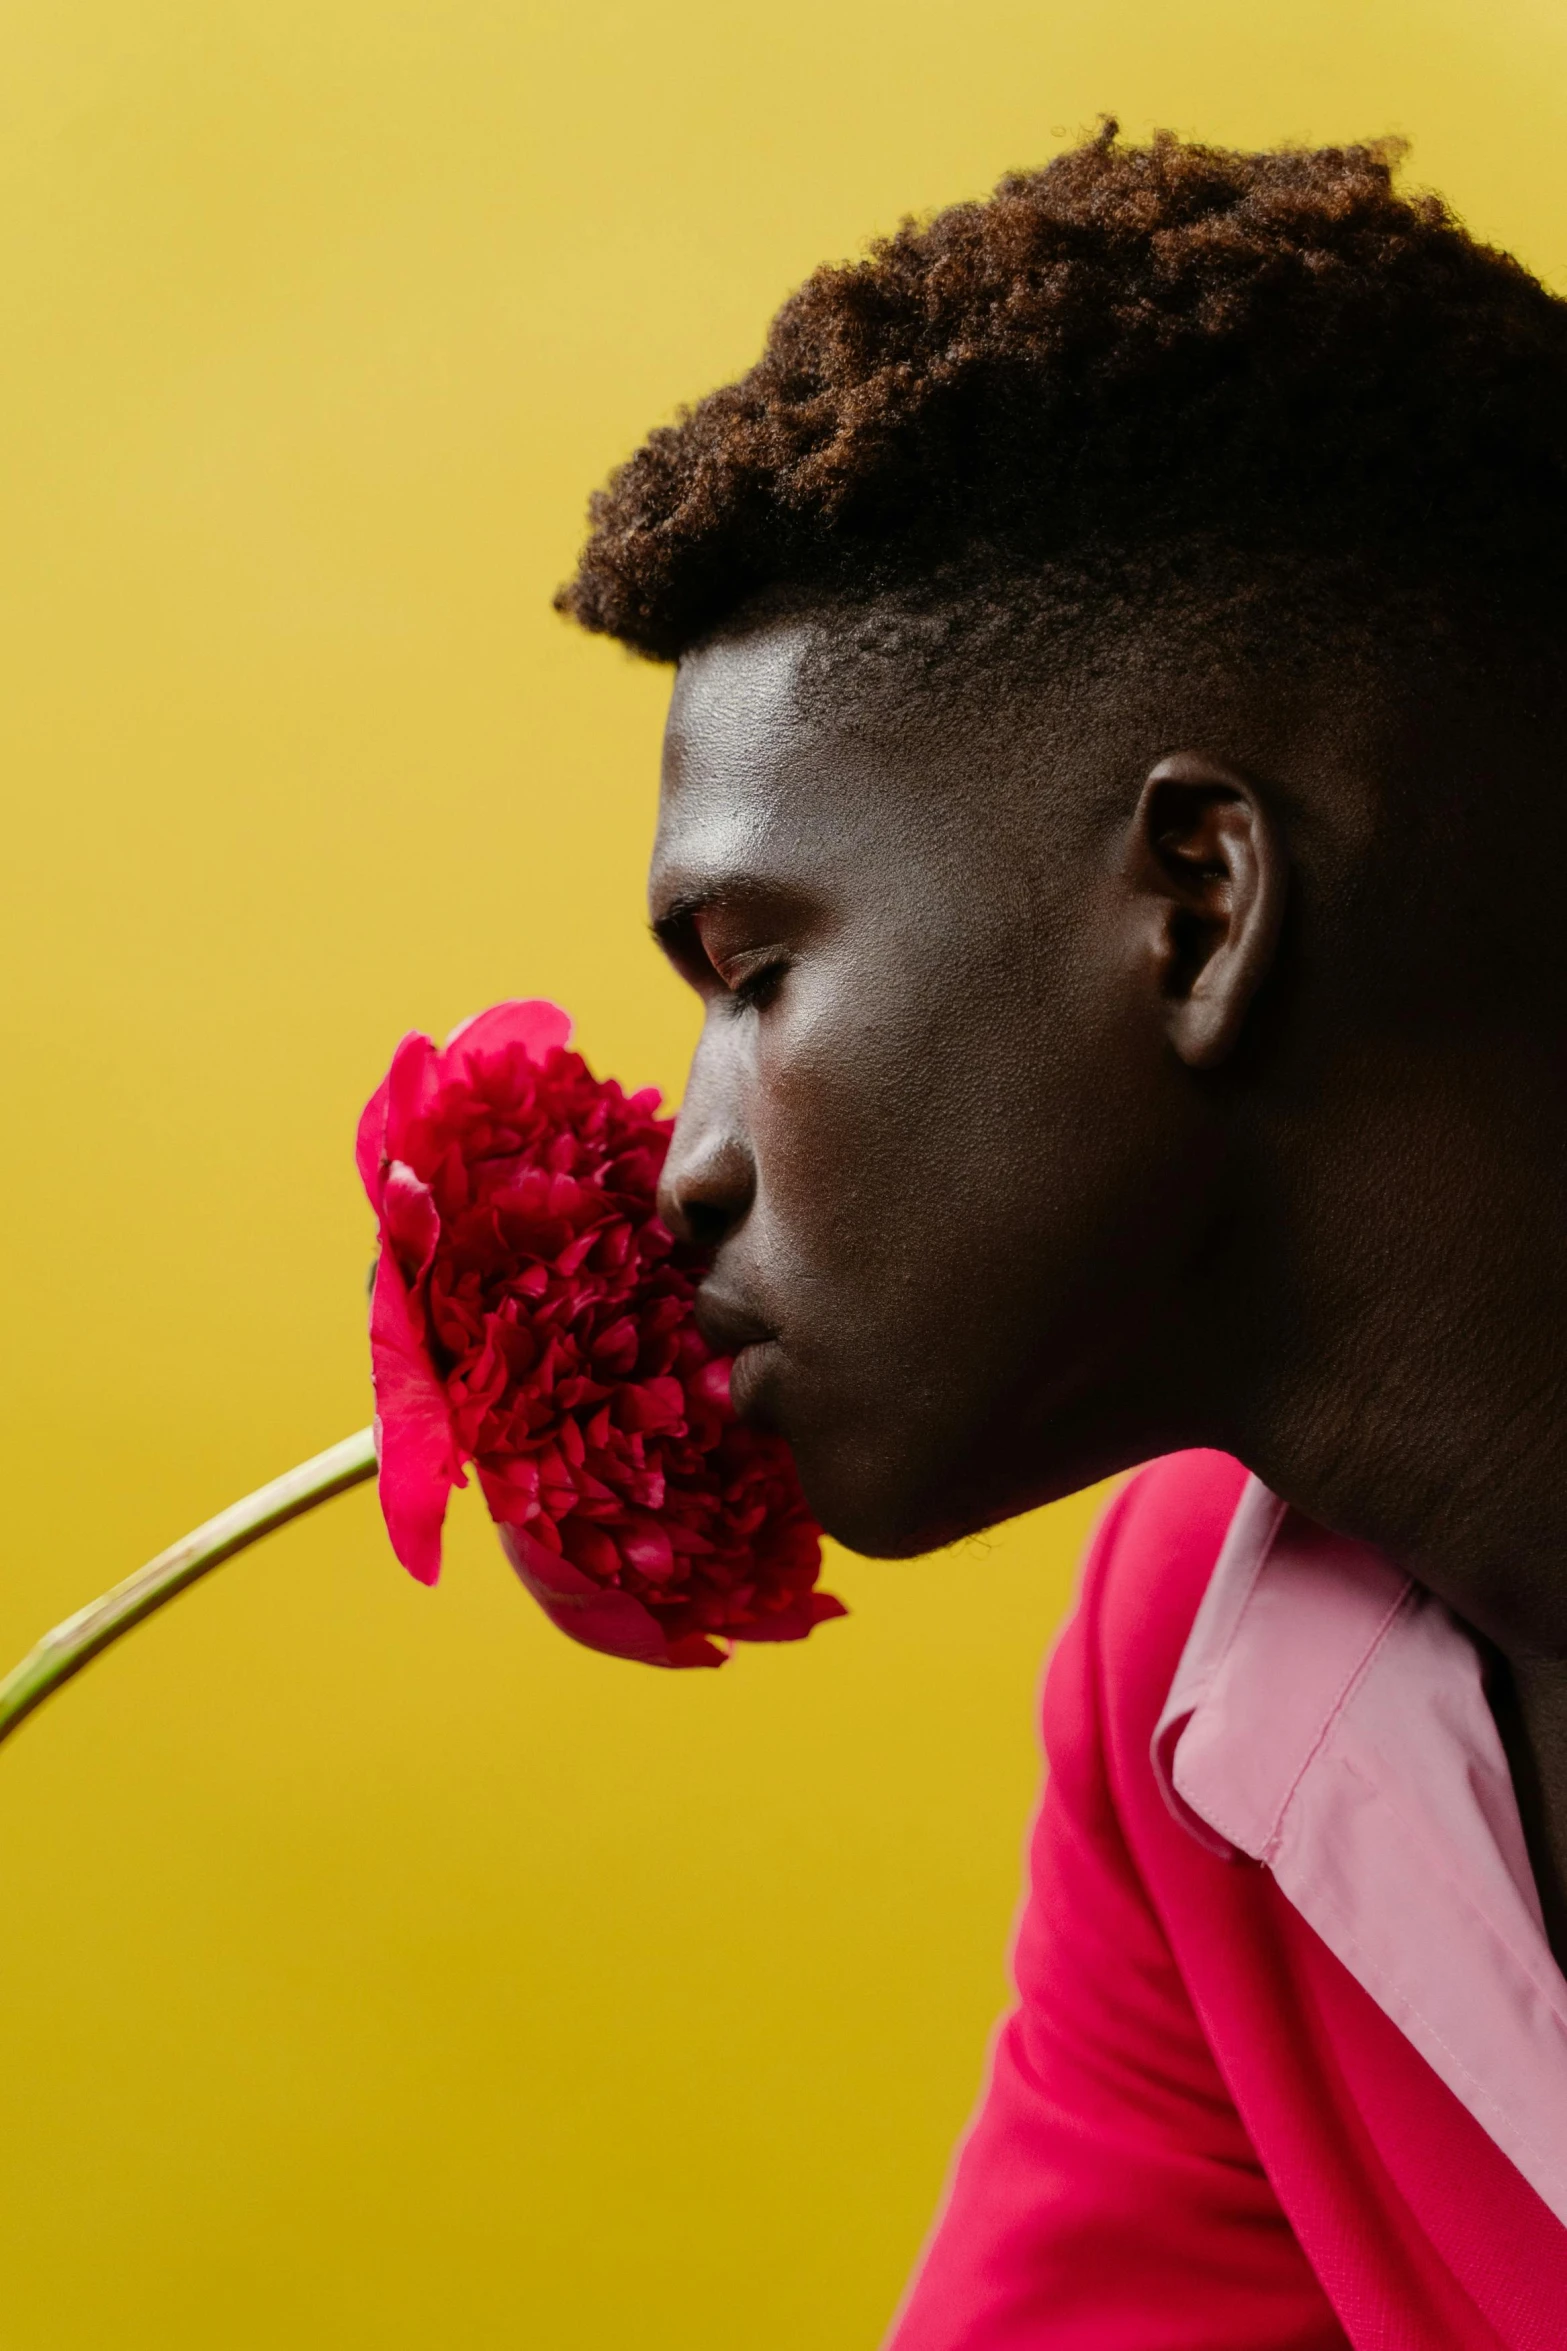 a man with short hair with a flower in his mouth